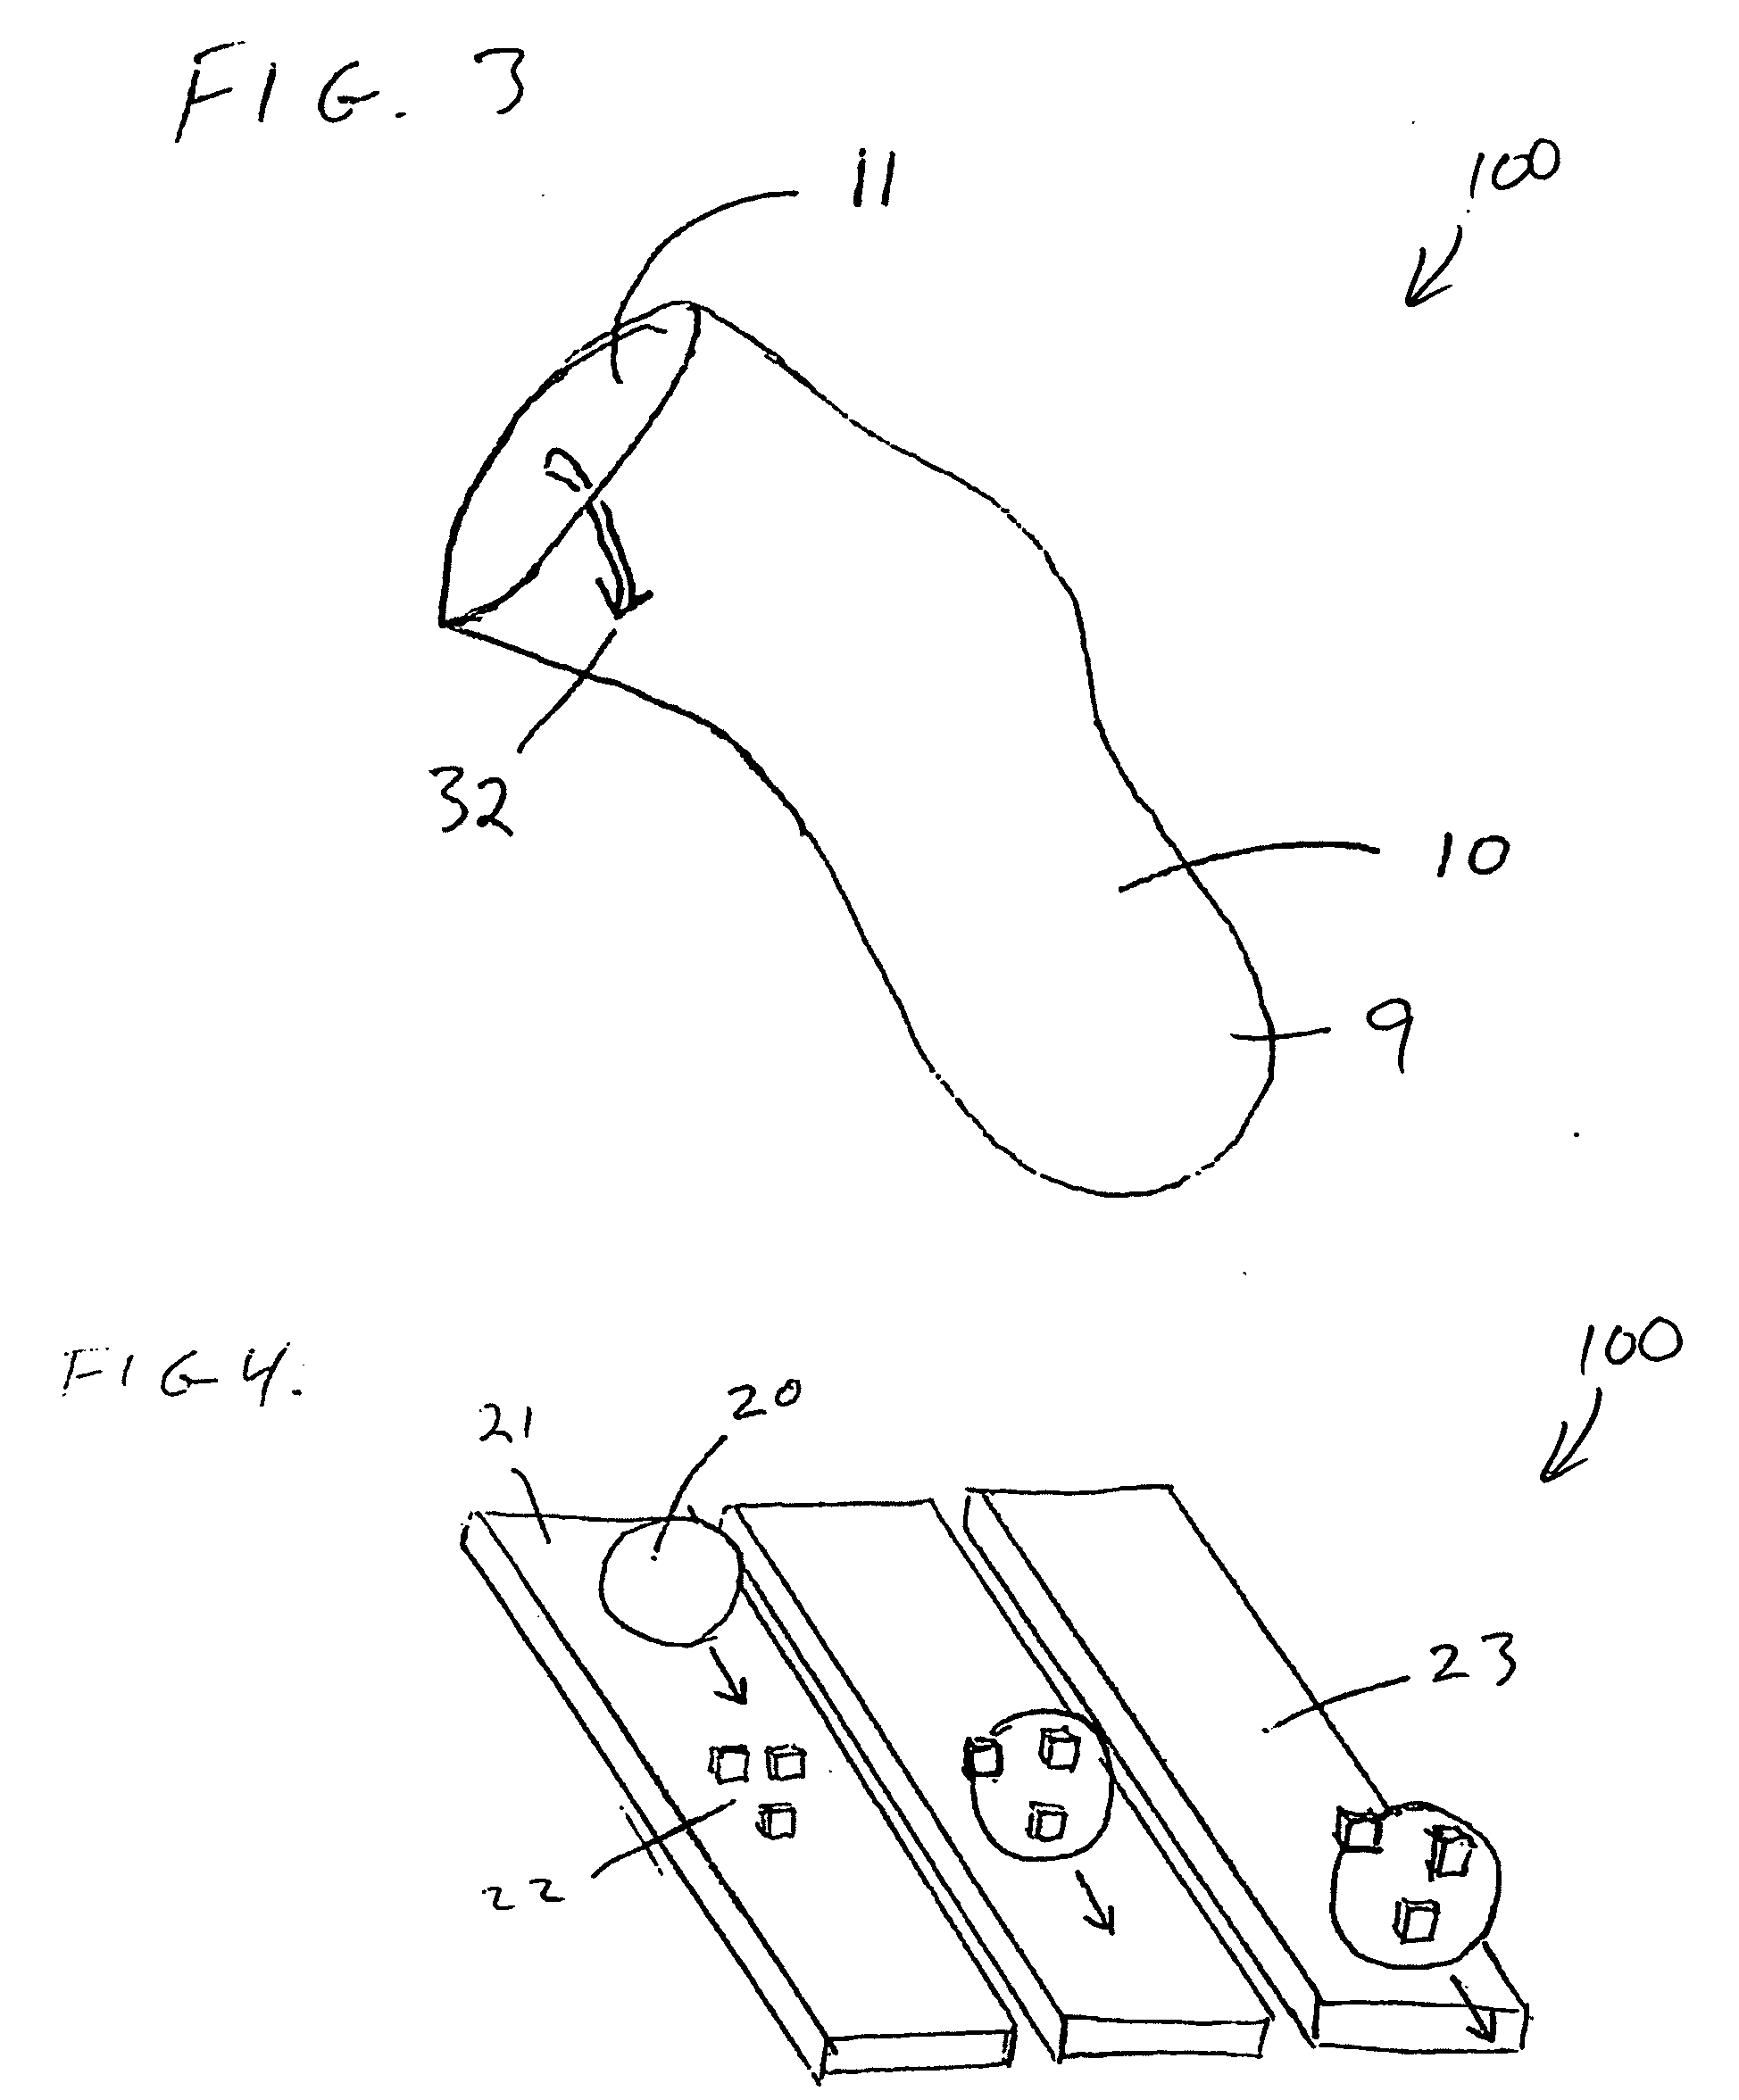 Nano materials application in durable medical equipment and method of using same